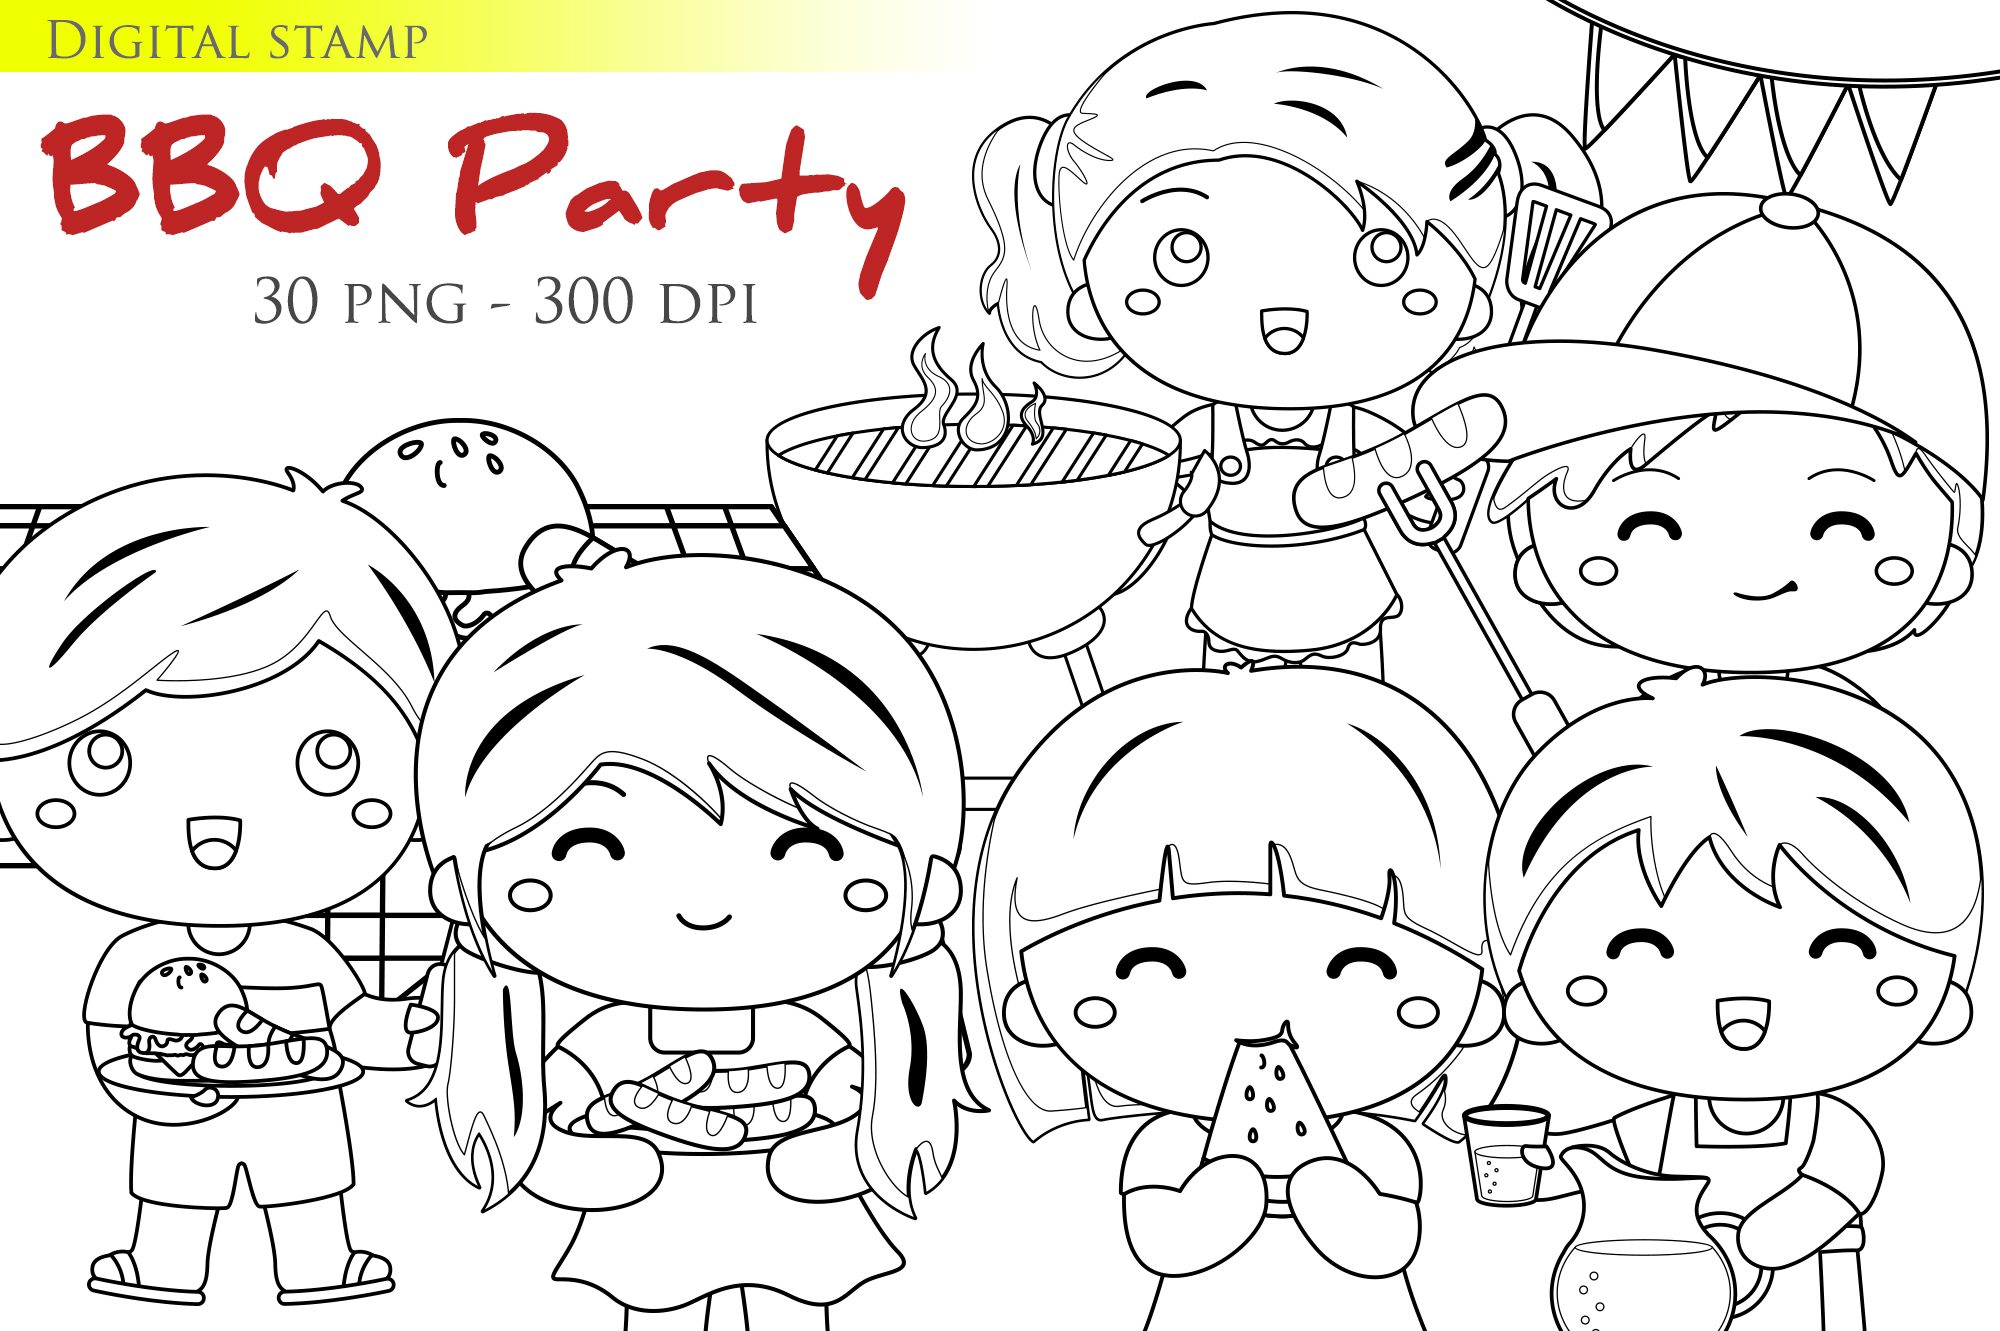 Group of cartoon children with a bbq party sign in the background.